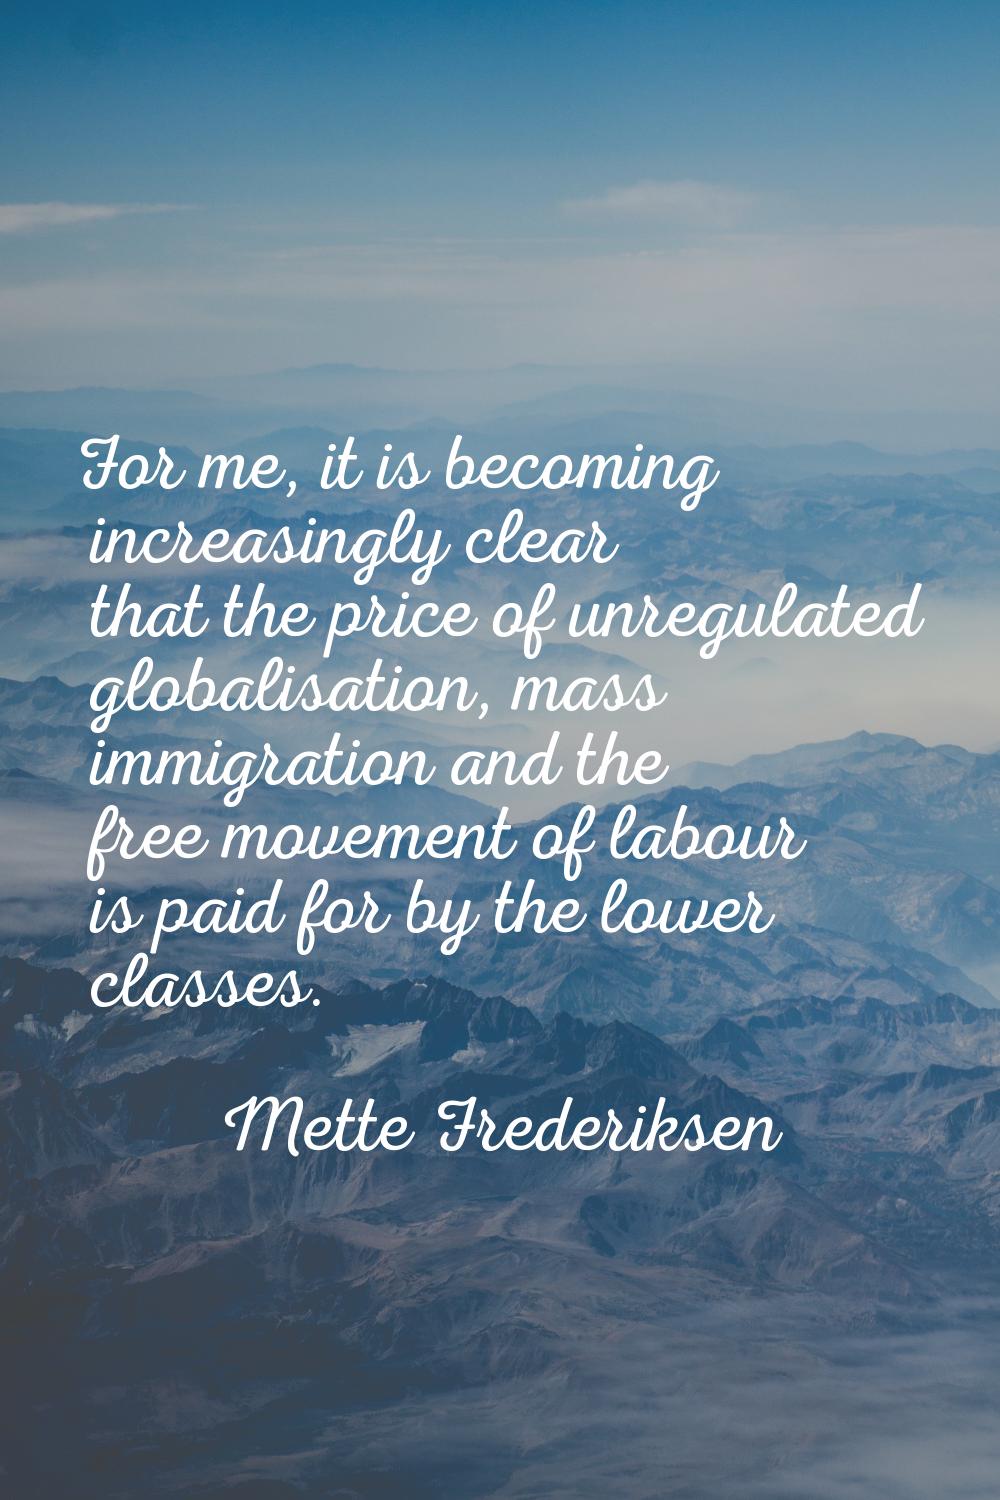 For me, it is becoming increasingly clear that the price of unregulated globalisation, mass immigra